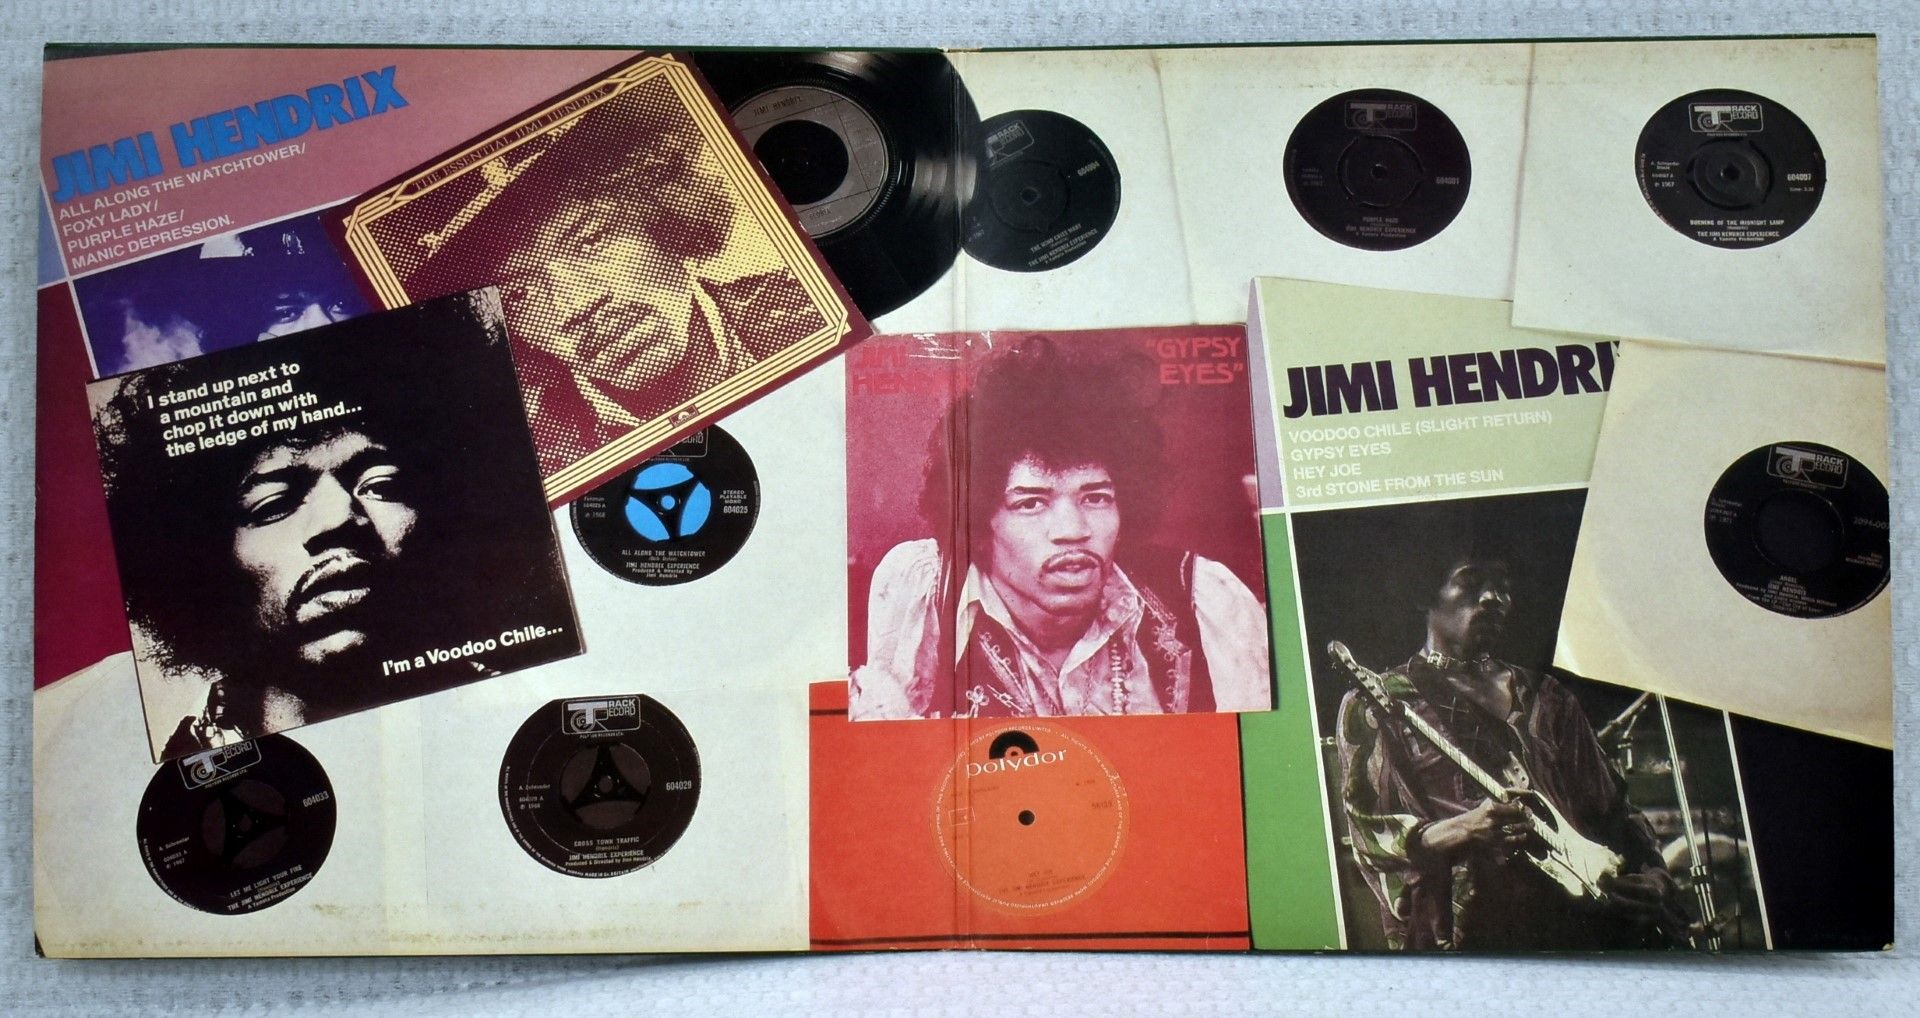 1 x JIMI HENDRIX The Singles Album Polydor Records Limited 1983 2 Double Sided 12 Inch Vinyls - - Image 9 of 22